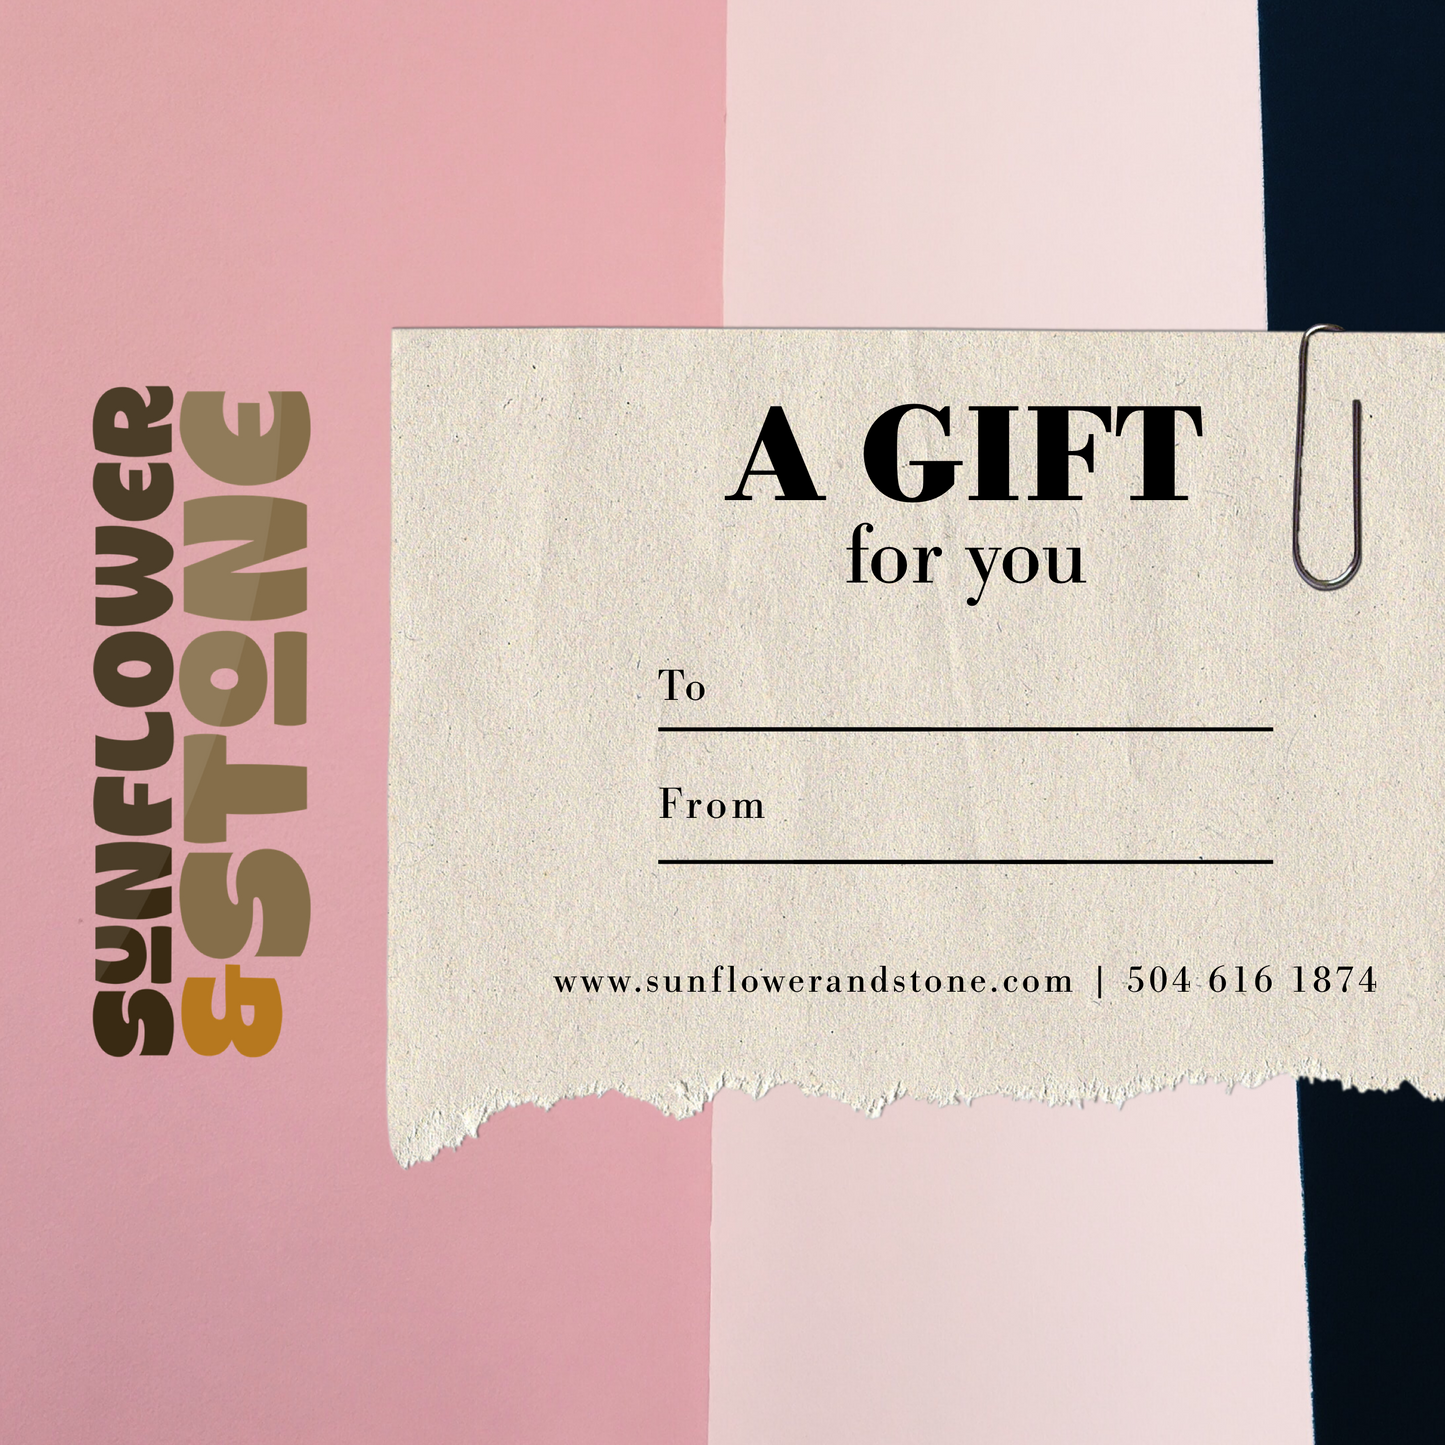 Sunflower and Stone Gift Card!